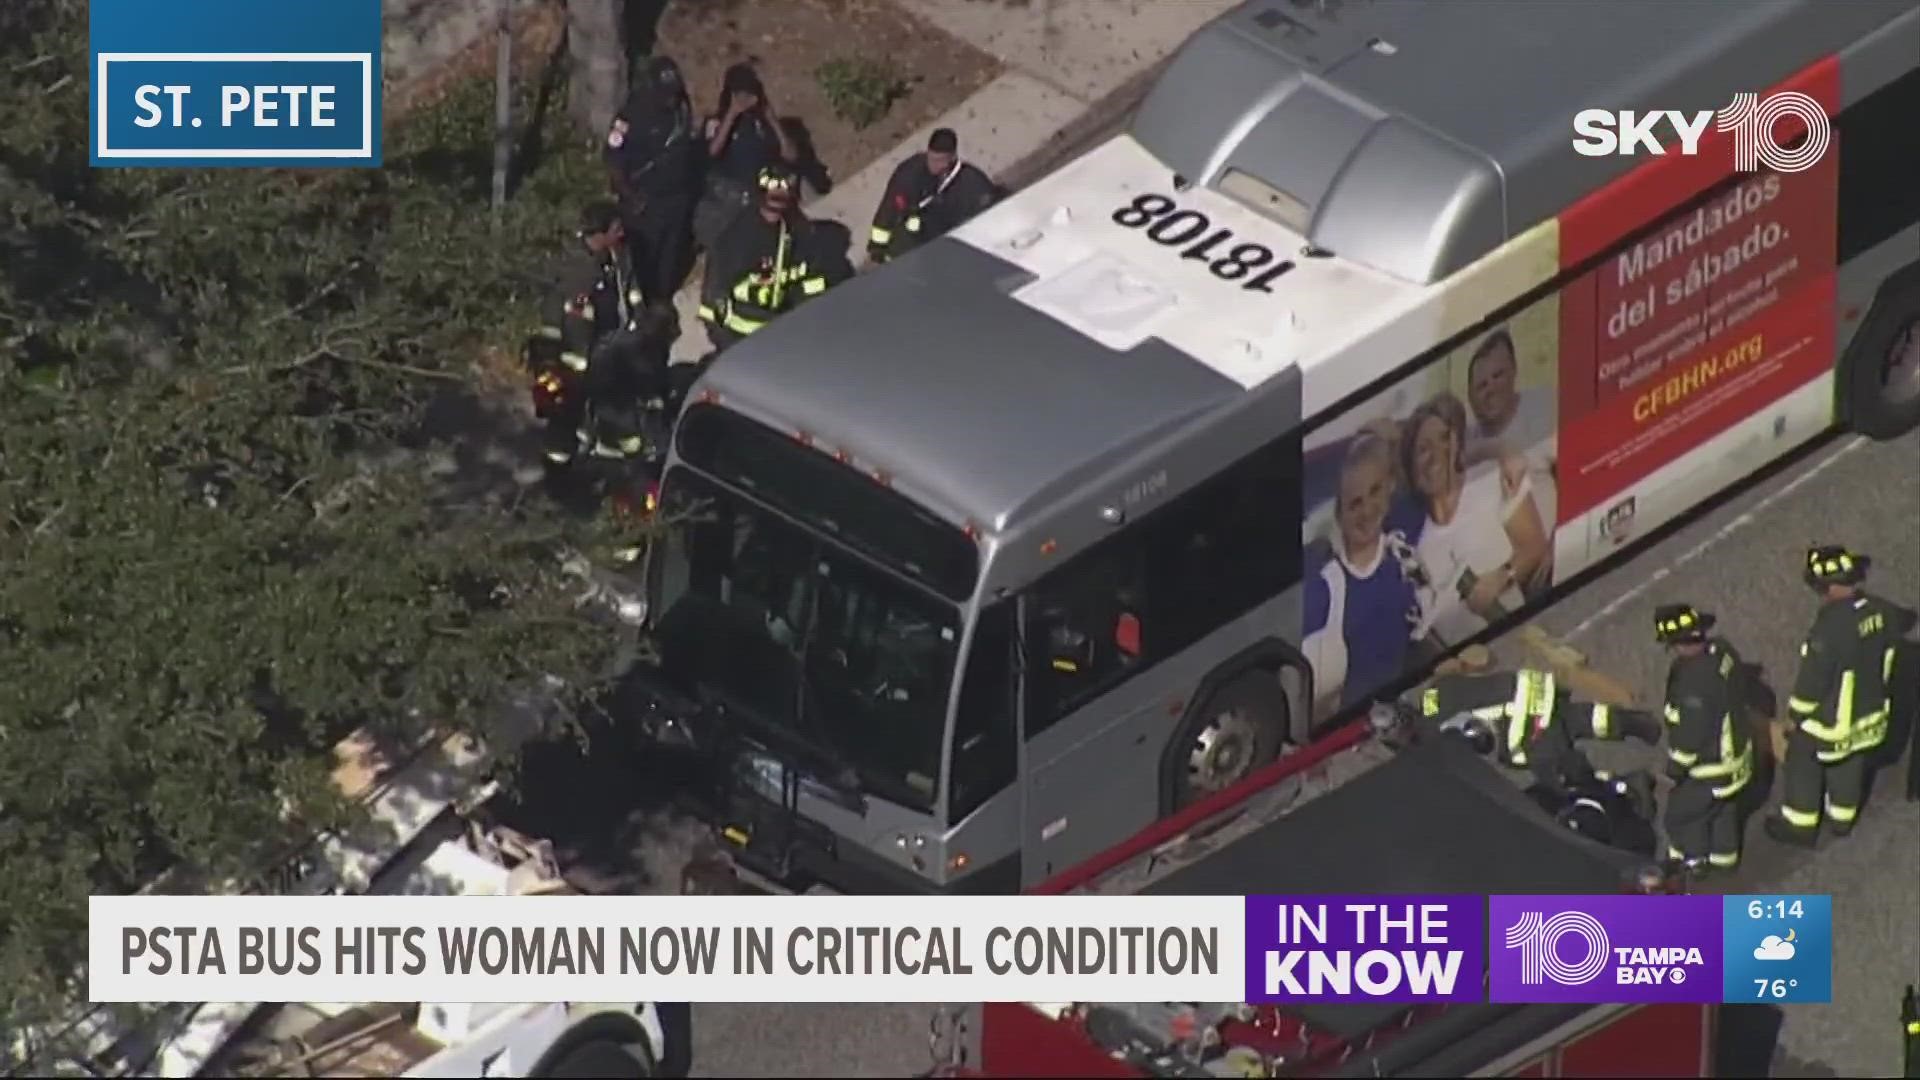 Law enforcement worked to remove the woman from under the bus and immediately transported her to Bayfront Health for life-threatening injuries.